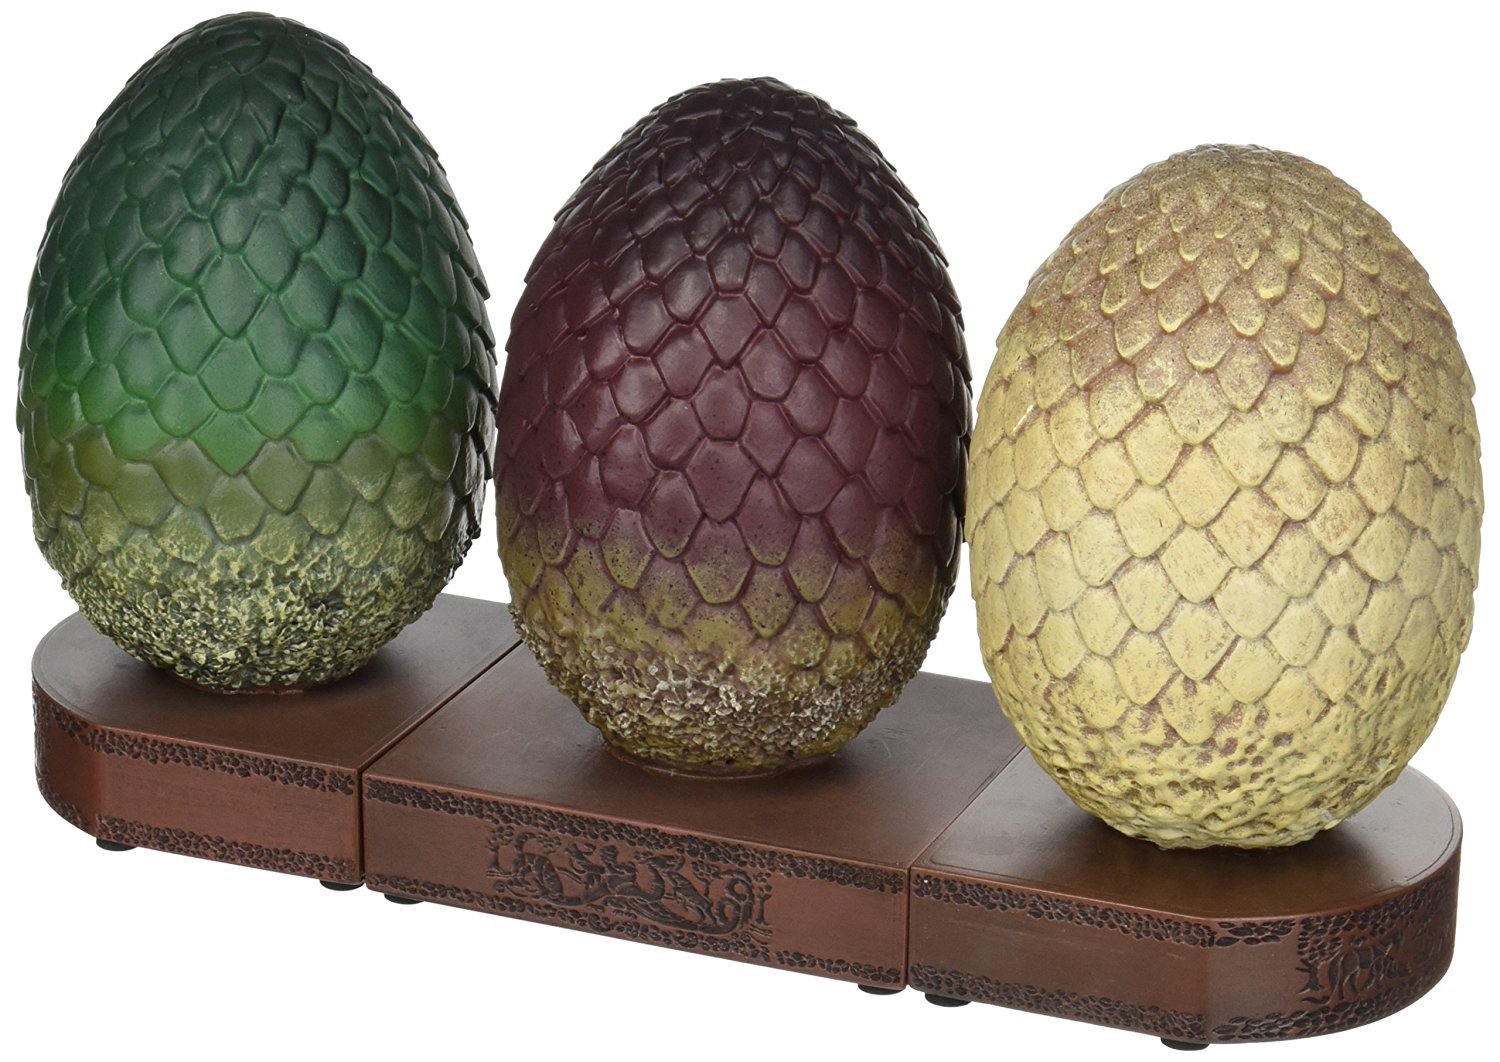 Game of Thrones Dragon Eggs Bookend